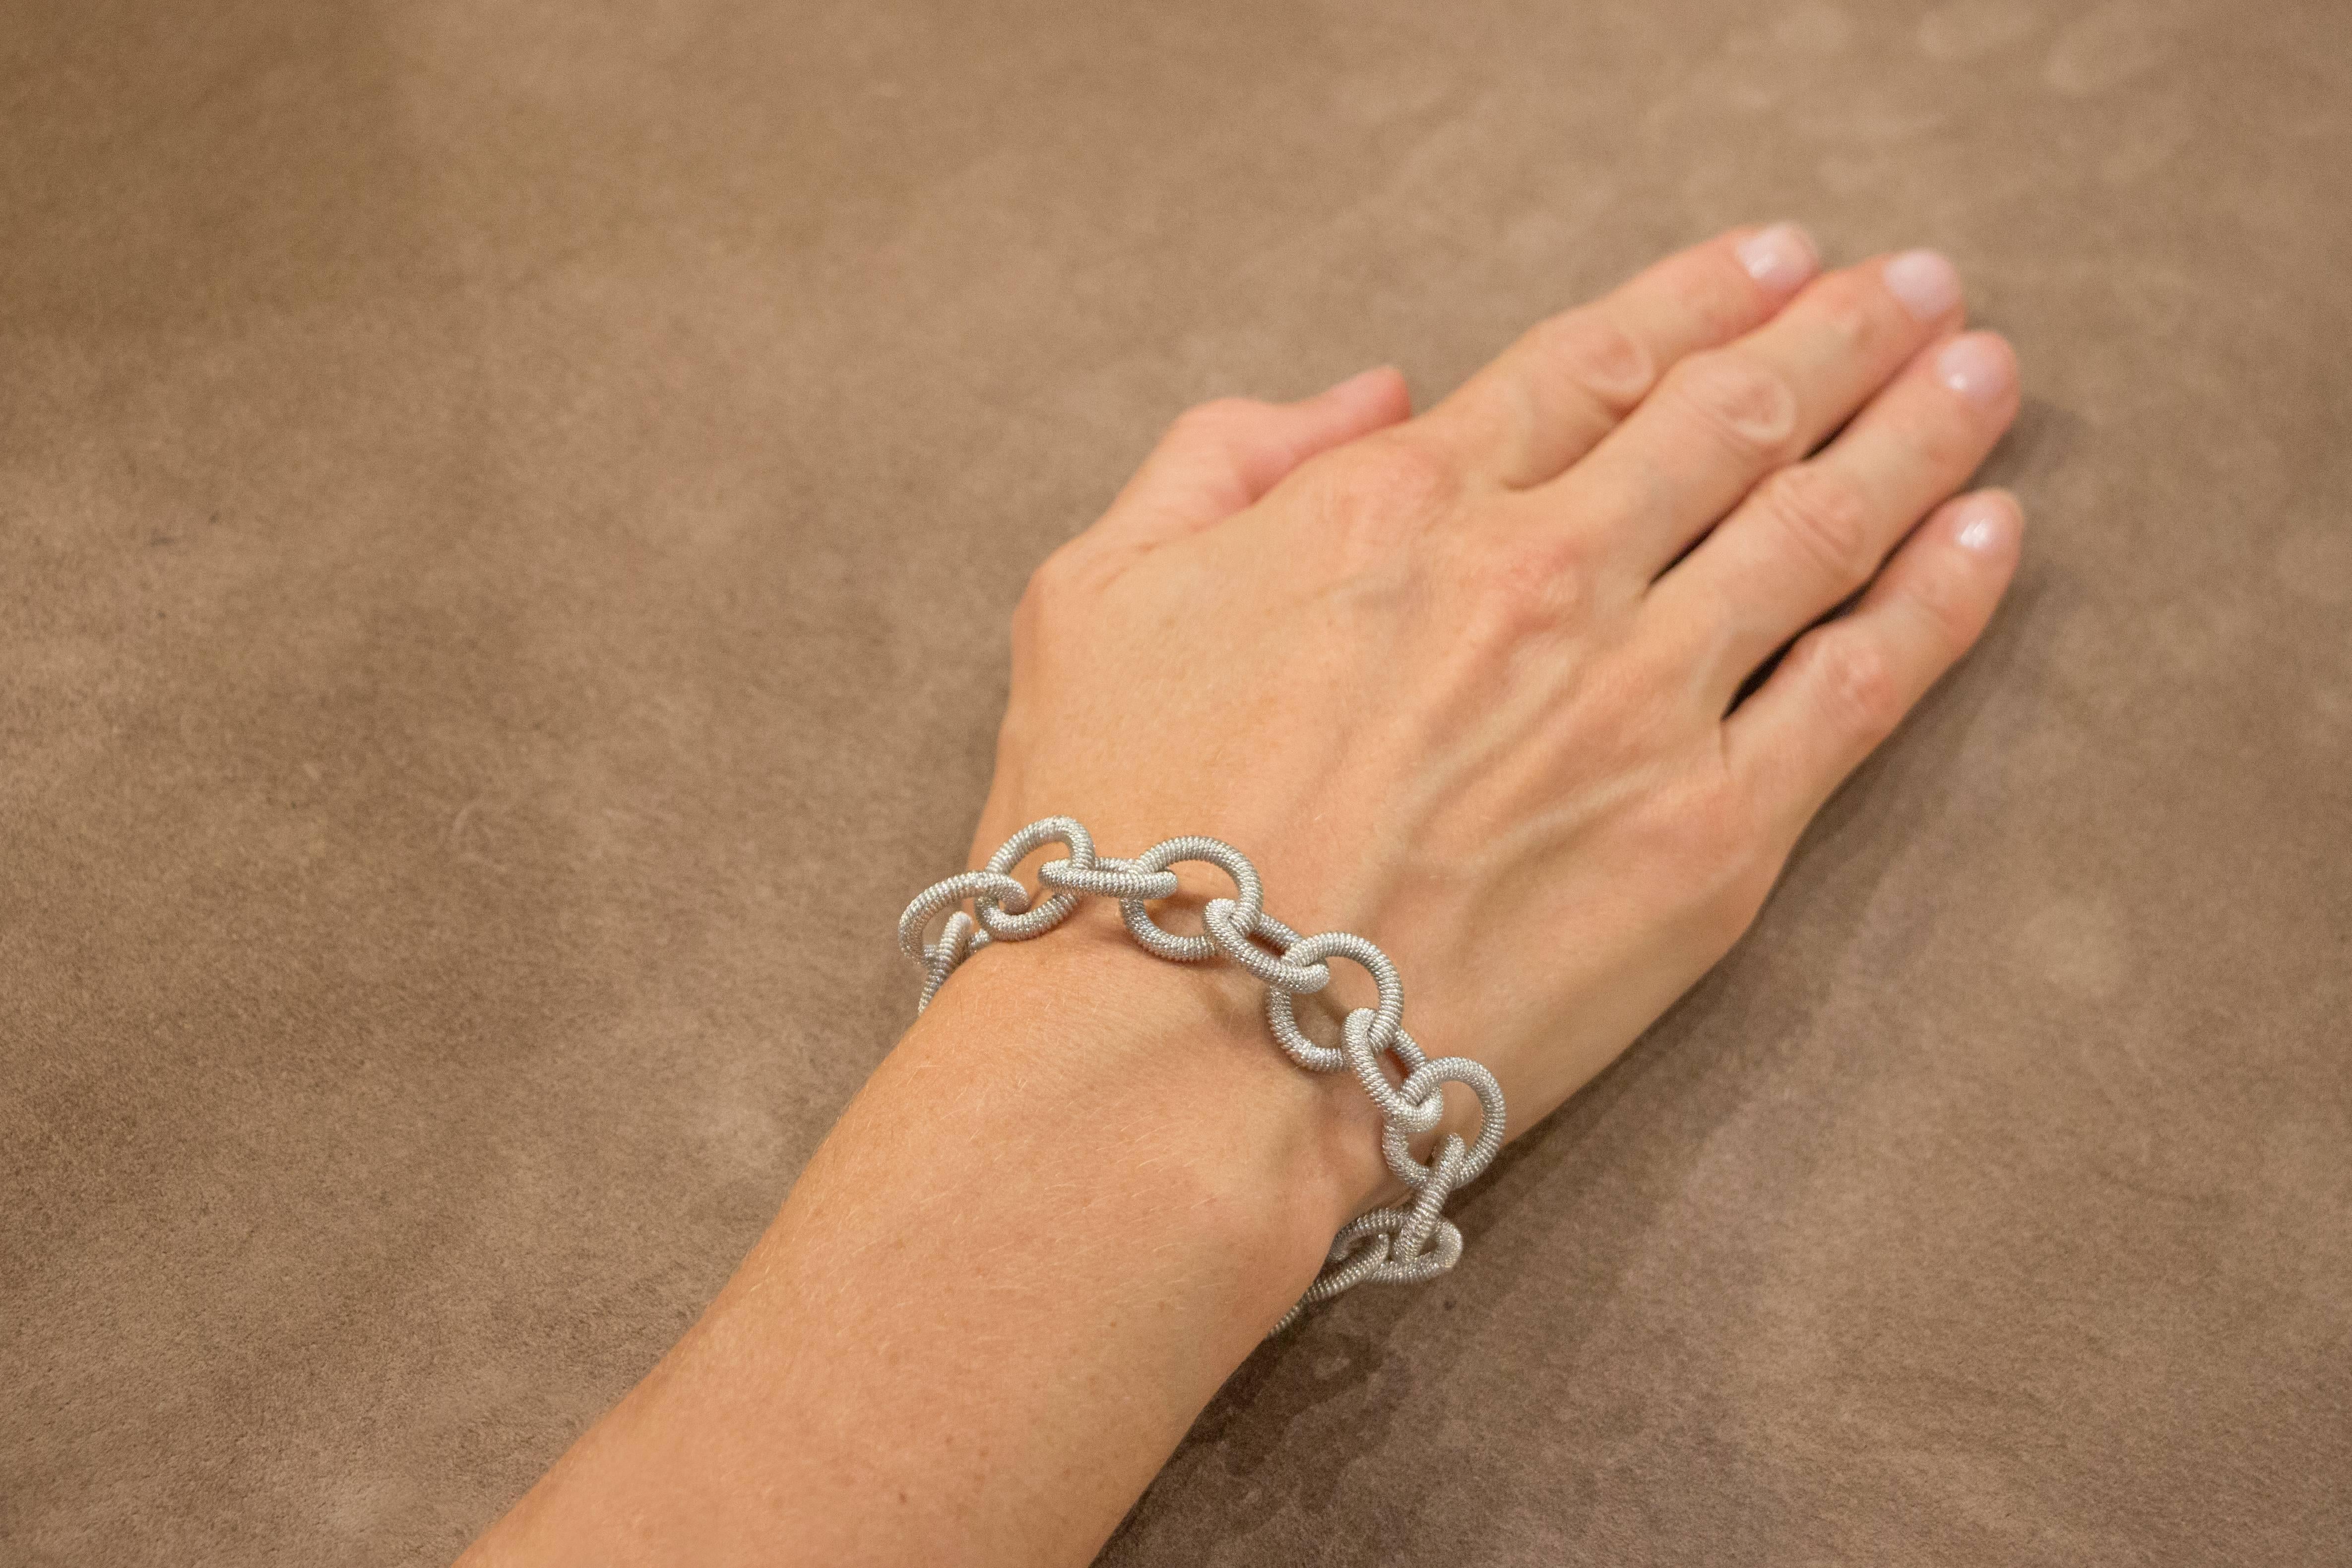 Alex Jona design collection, hand crafted in Italy, rhodium plated twisted wire sterling silver link chain bracelet. Dimensions: 7.06 in. L. x 0.65 in. W x 0.63 in. D. /. 18 cm. L. x 1.65 cm. W x 1.6 cm. D

Alex Jona jewels stand out, not only for